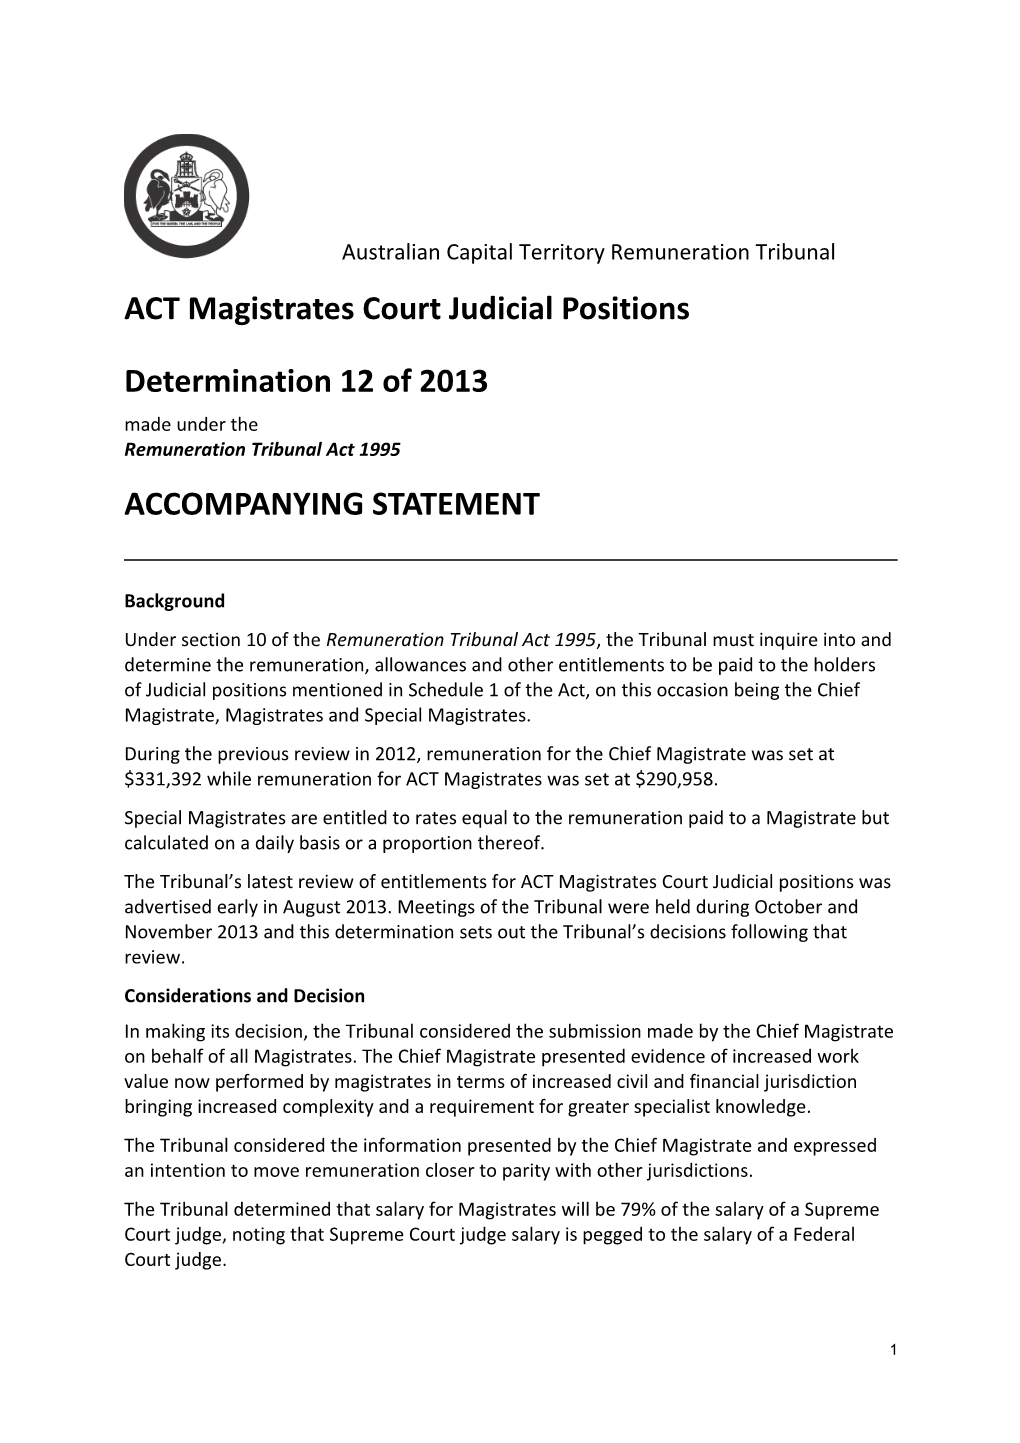 ACT Magistrates Court Judicial Positions